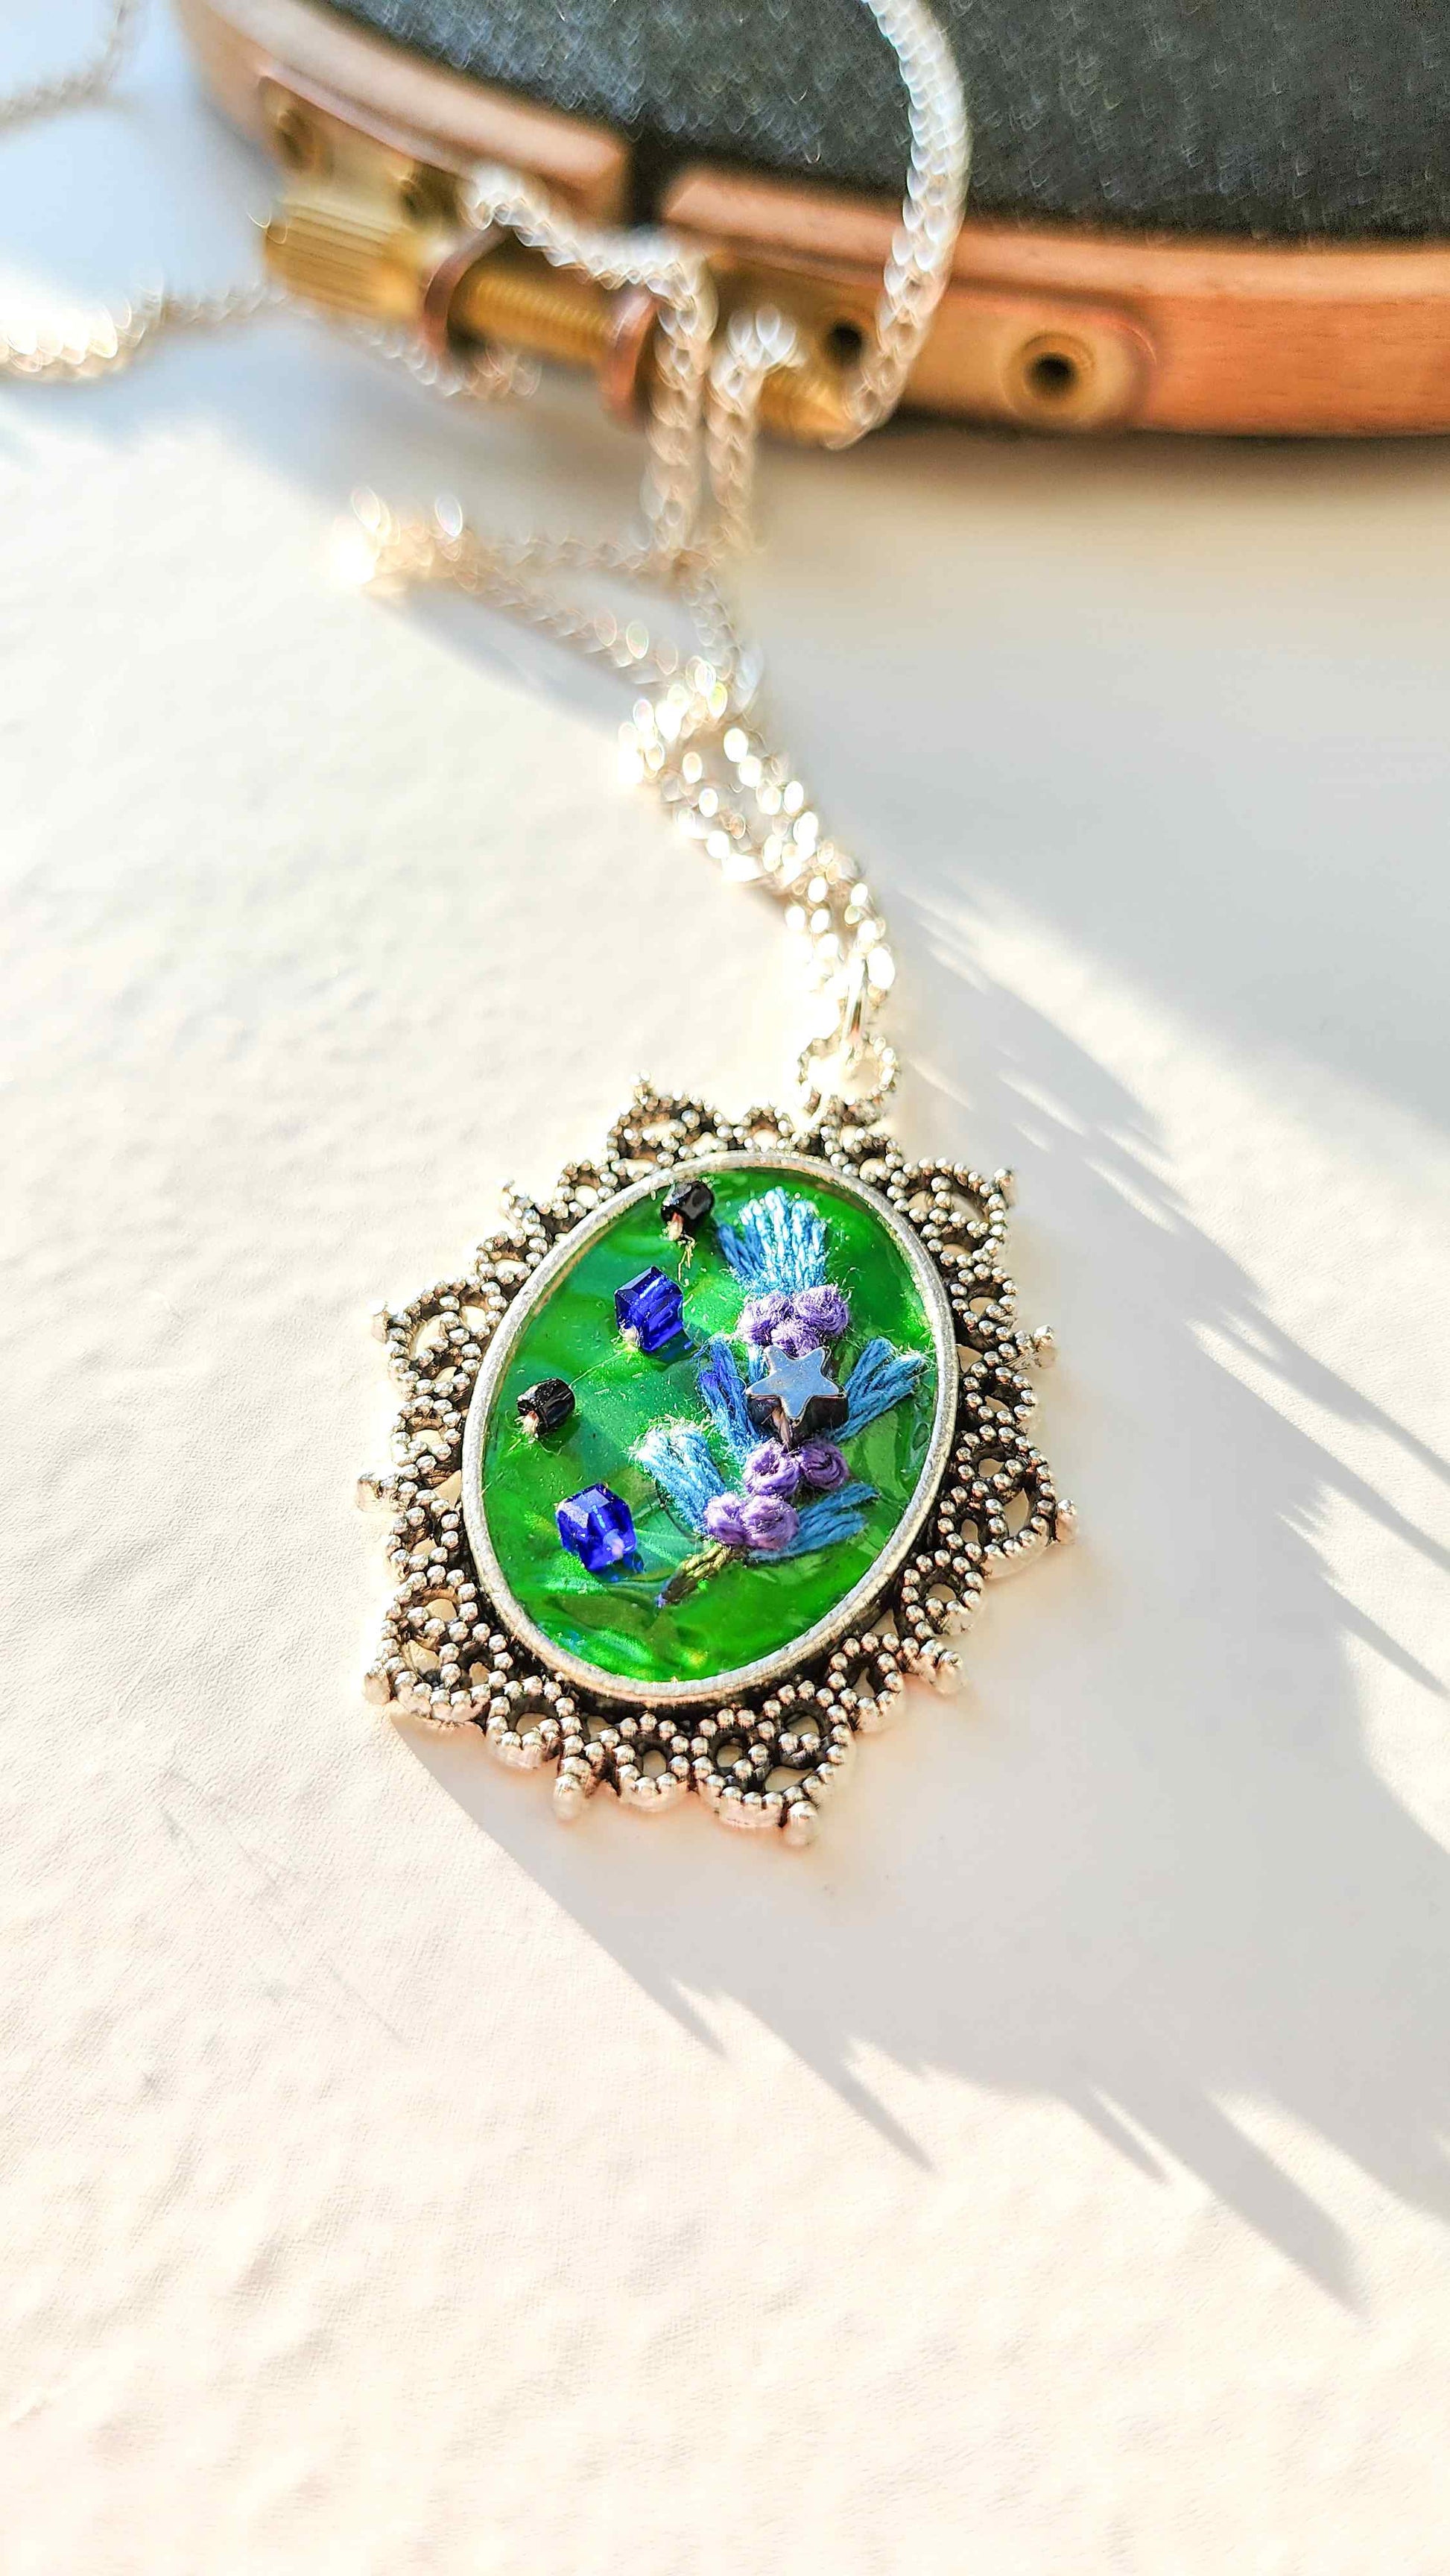 Embrace Embroidery Embroidered Necklace Hand Embroidered Abstract Floral Pendant